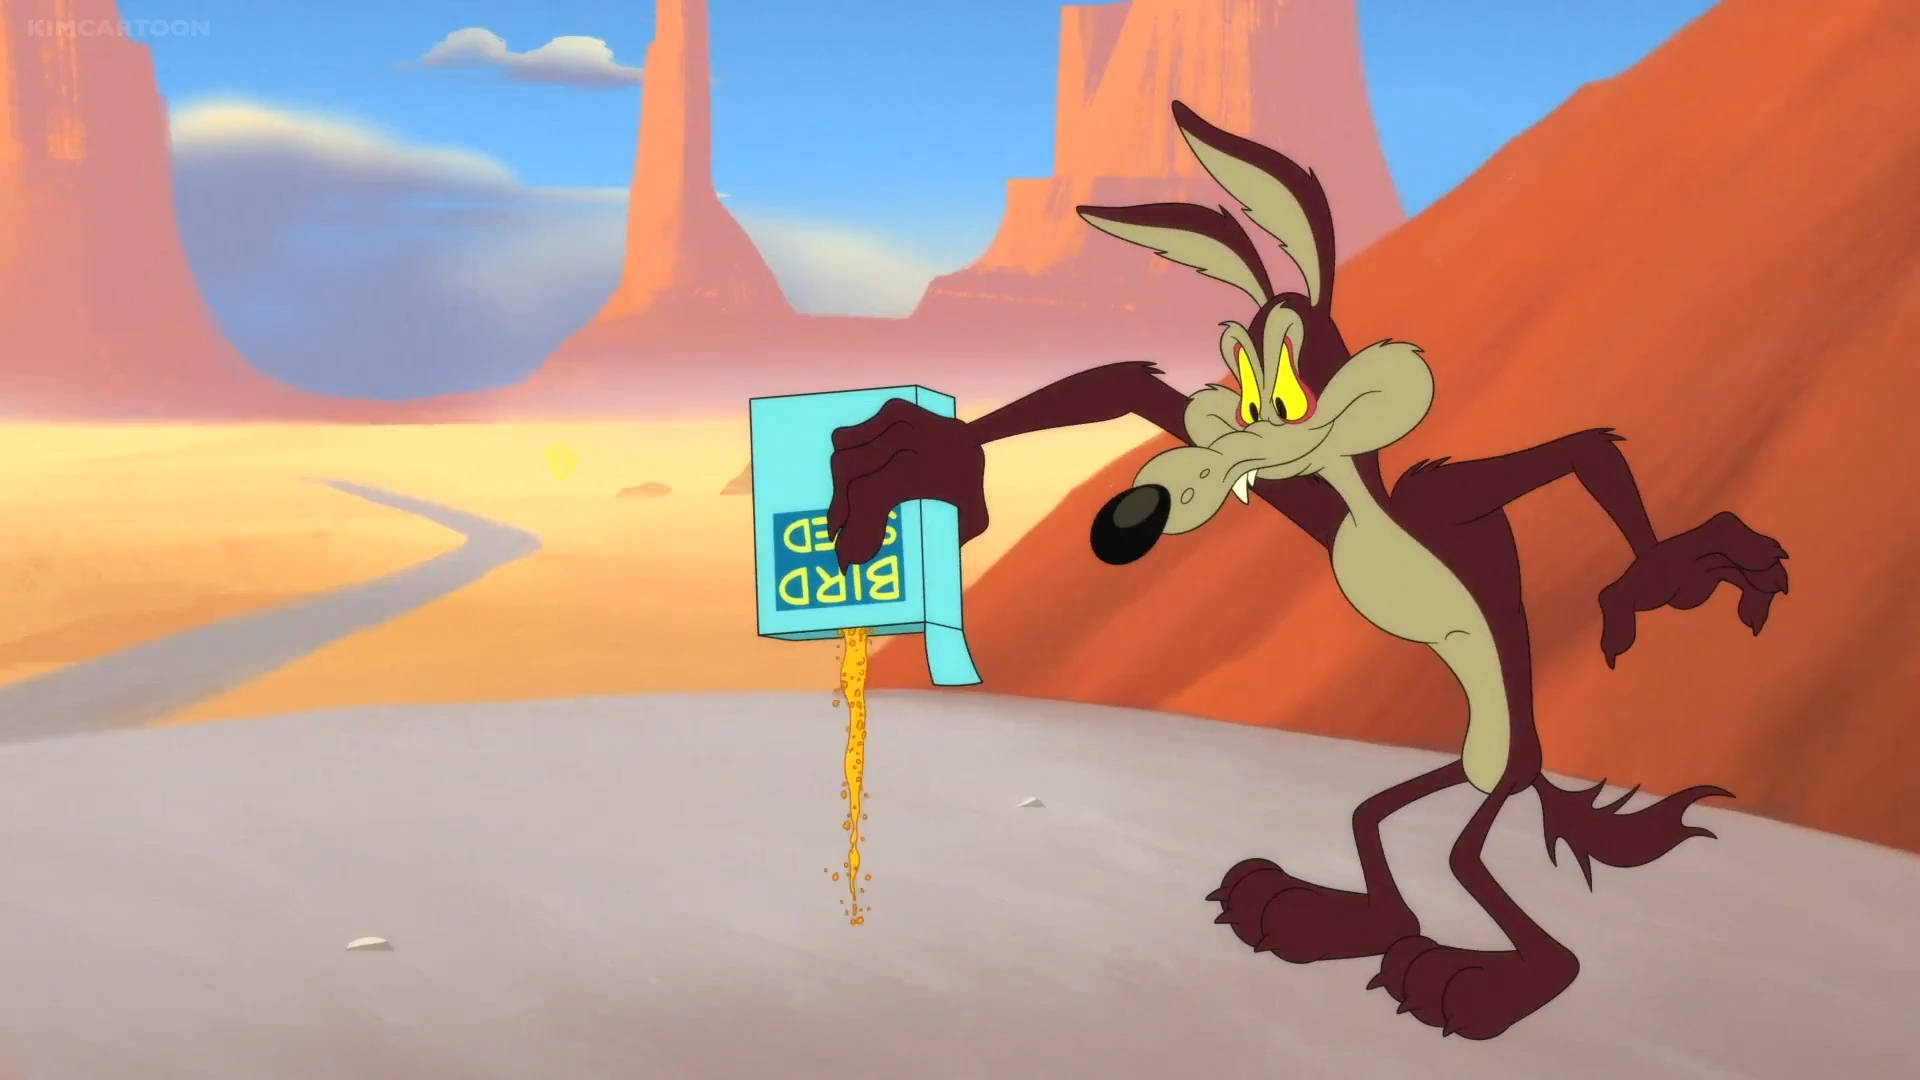 Wile E Coyote With Bird Seed Box